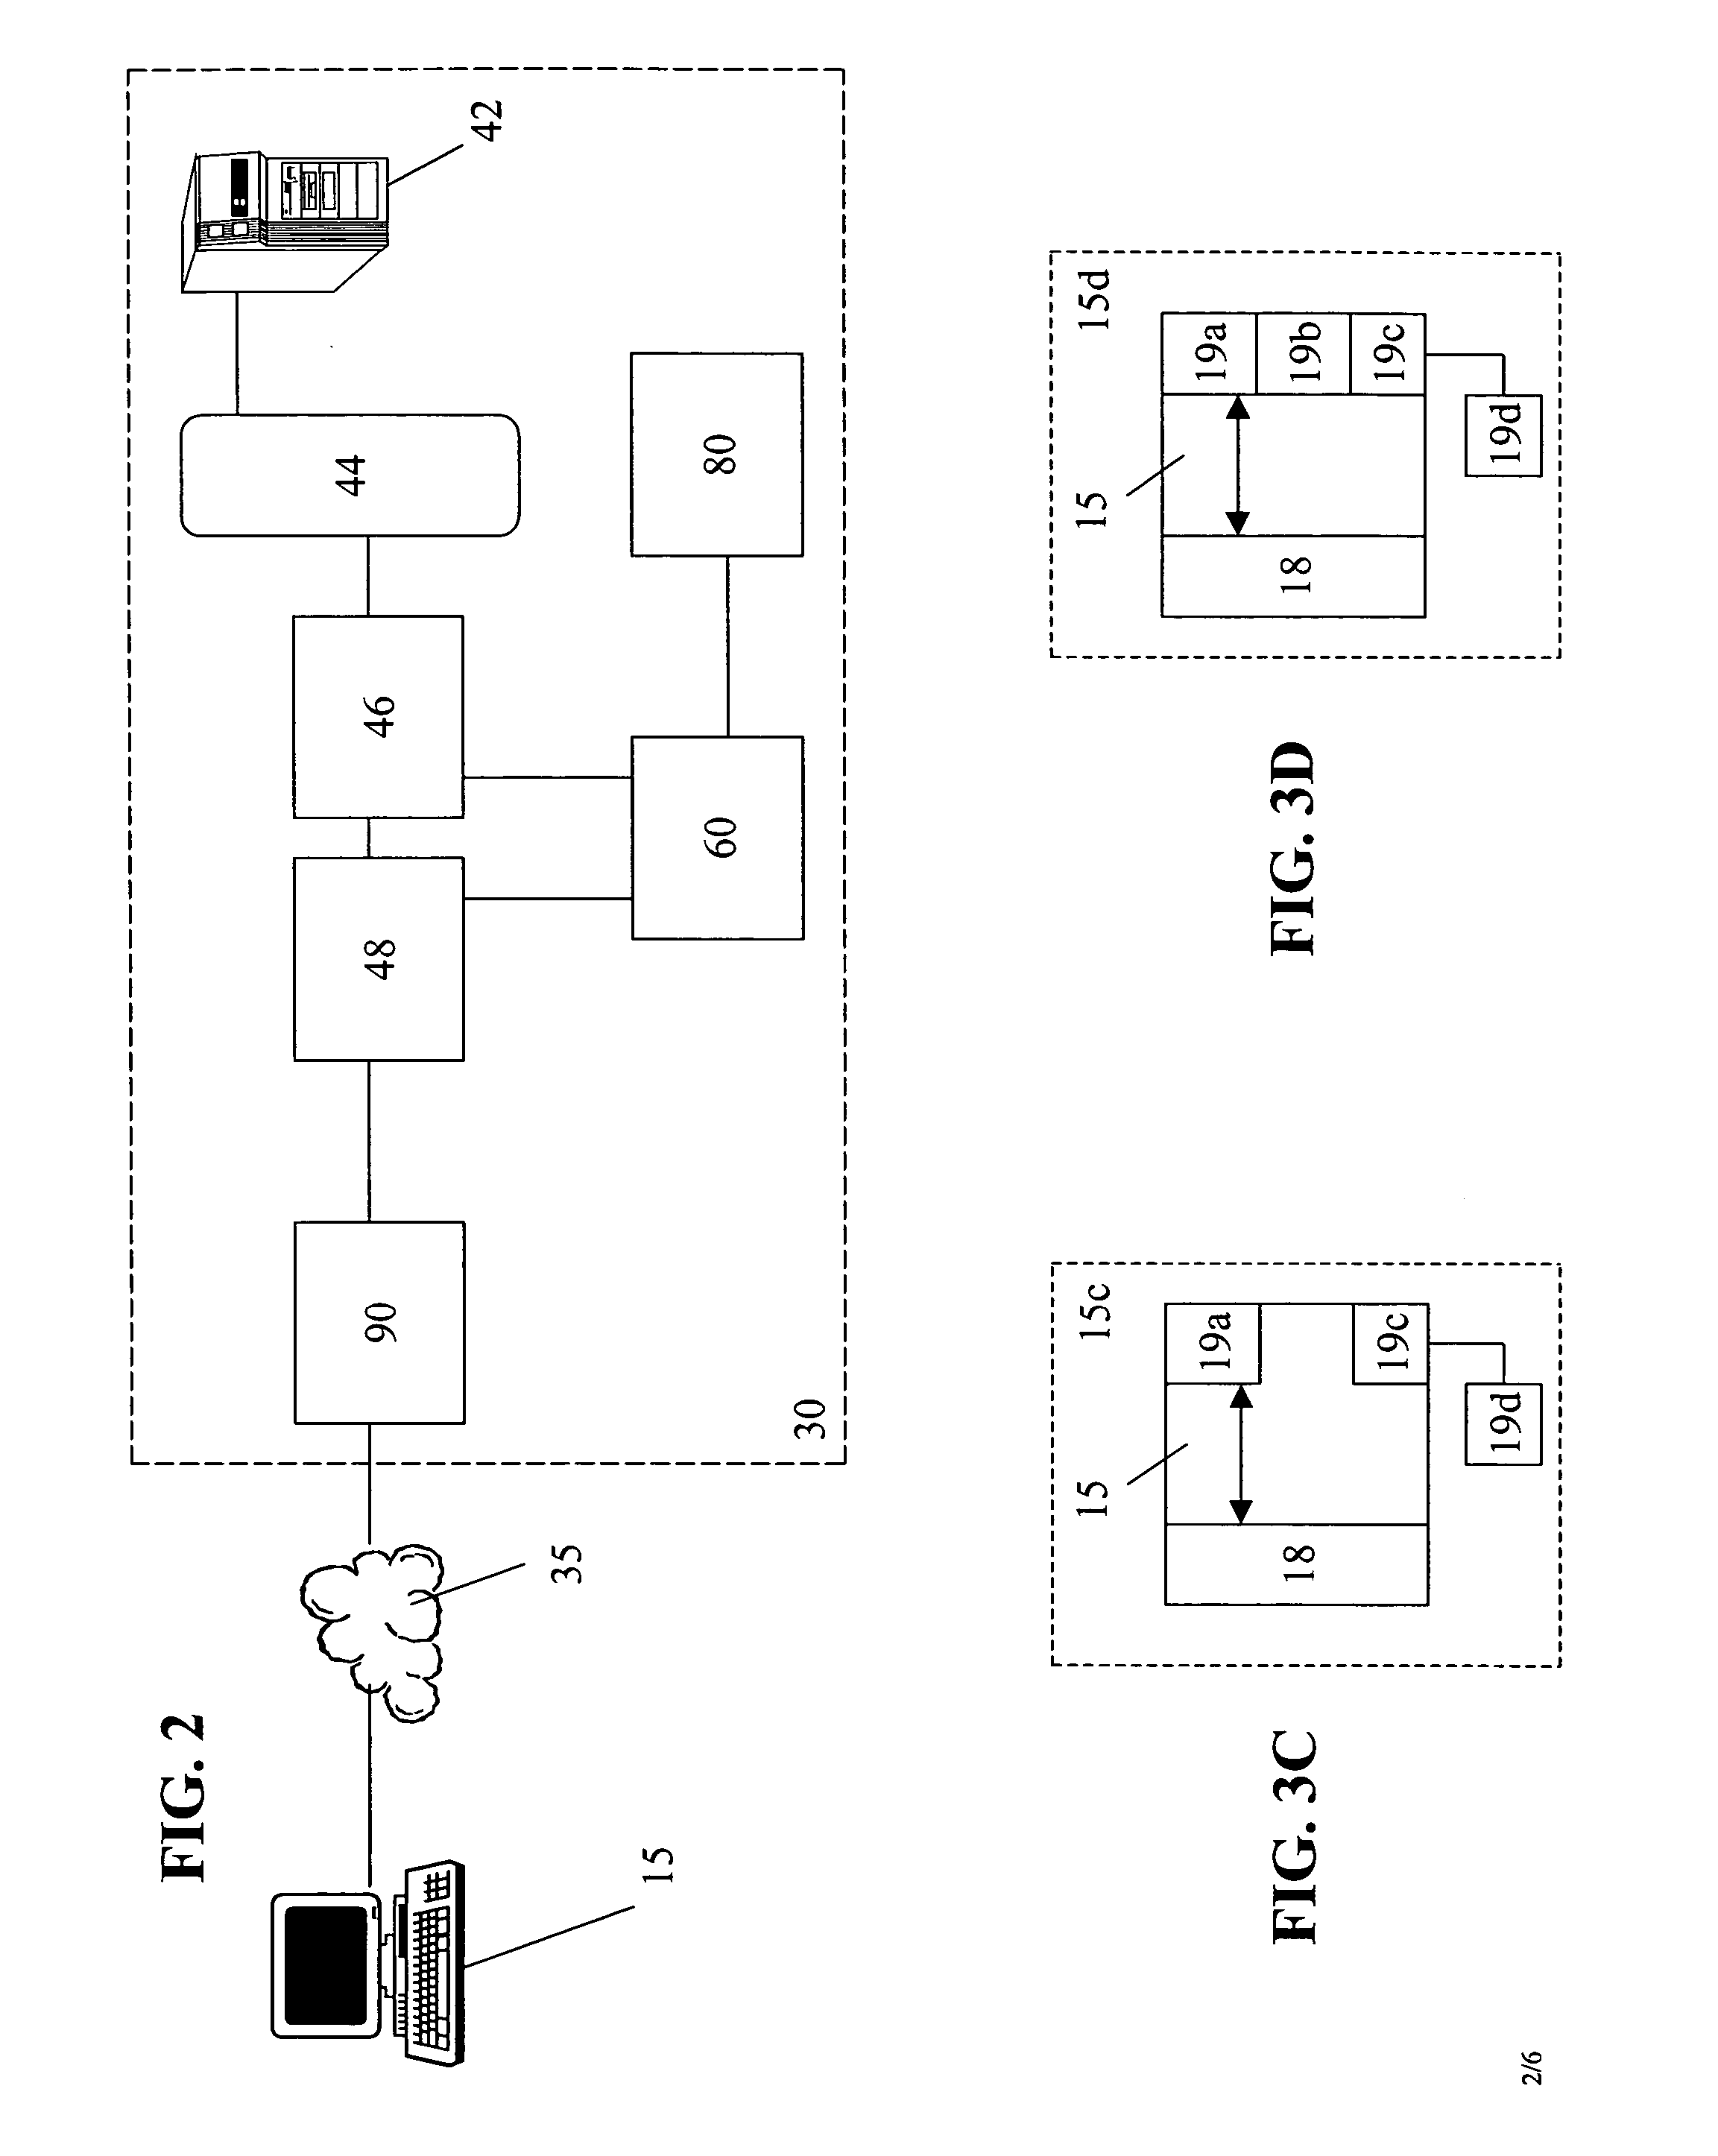 Lottery transaction device, system and method